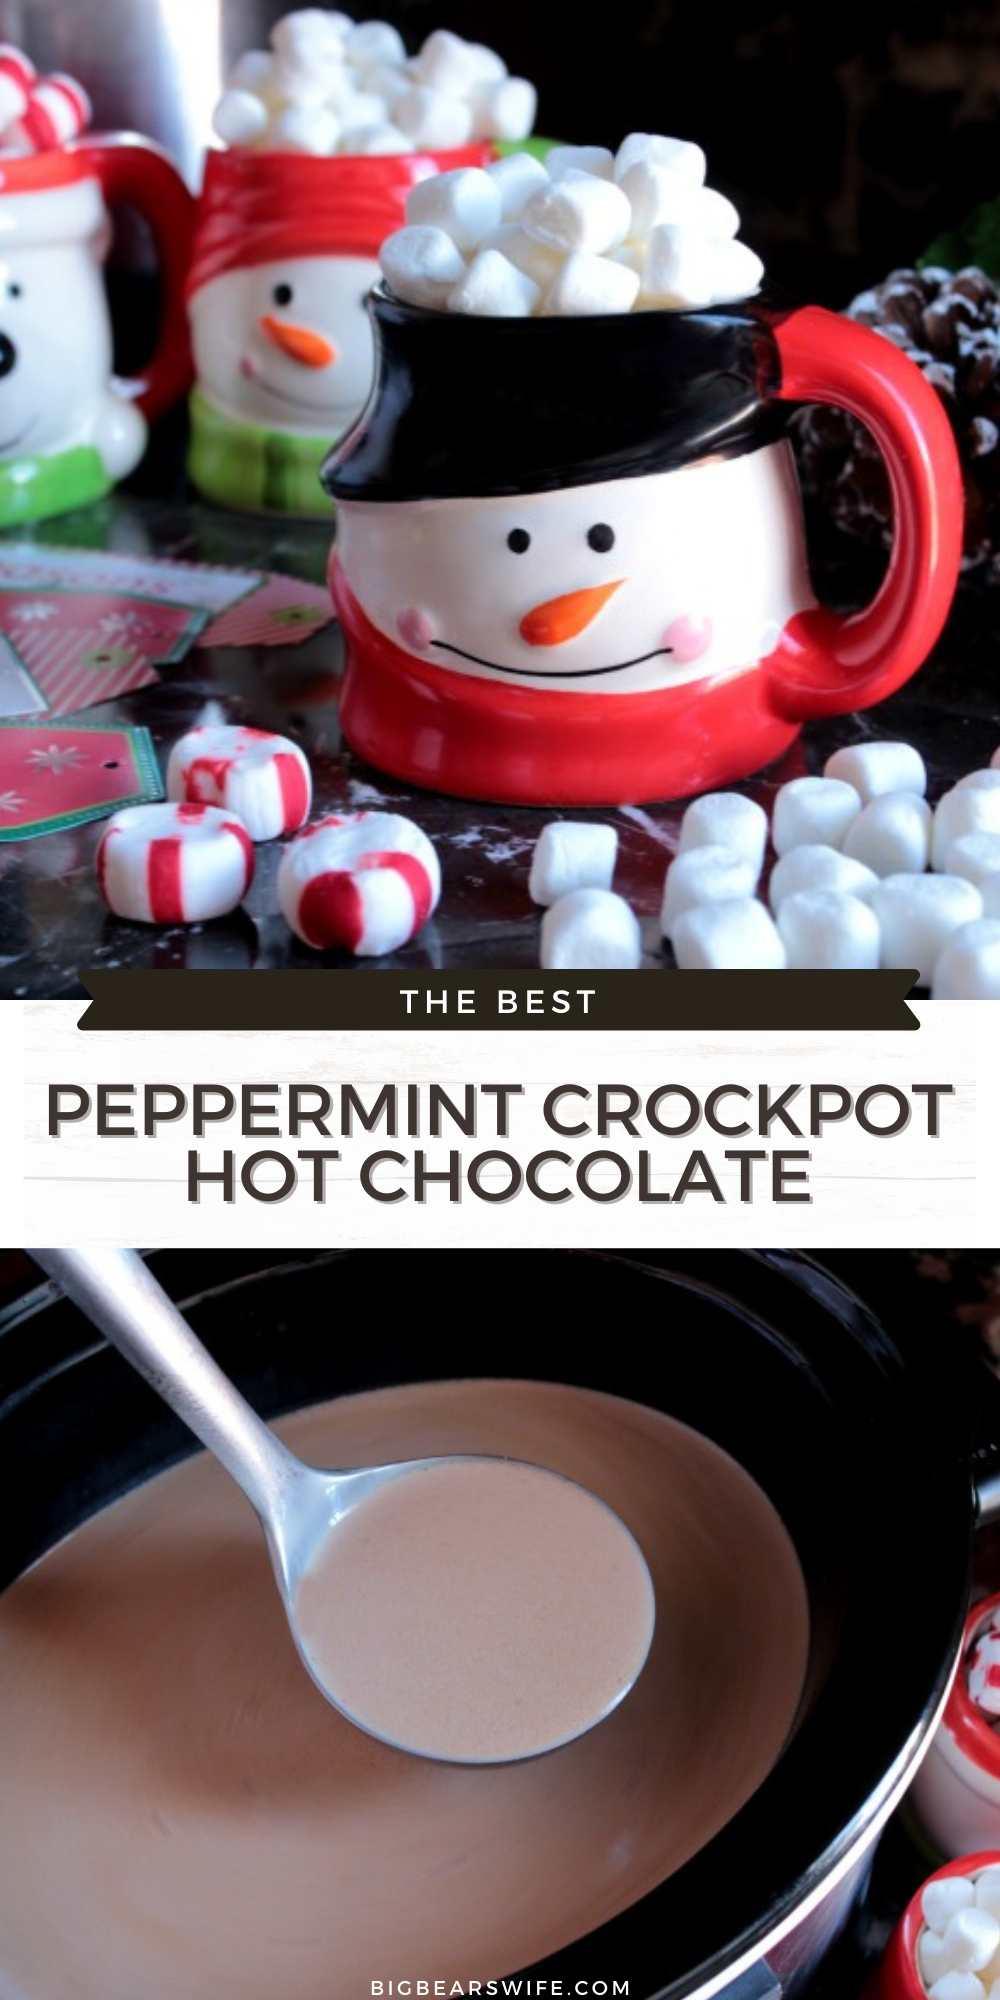  This Peppermint Crockpot Hot Chocolate is great for parties and evening at home with the family! Snuggle up on the couch with a movie and enjoy warm mugs of hot coco throughout the evening! 

 via @bigbearswife